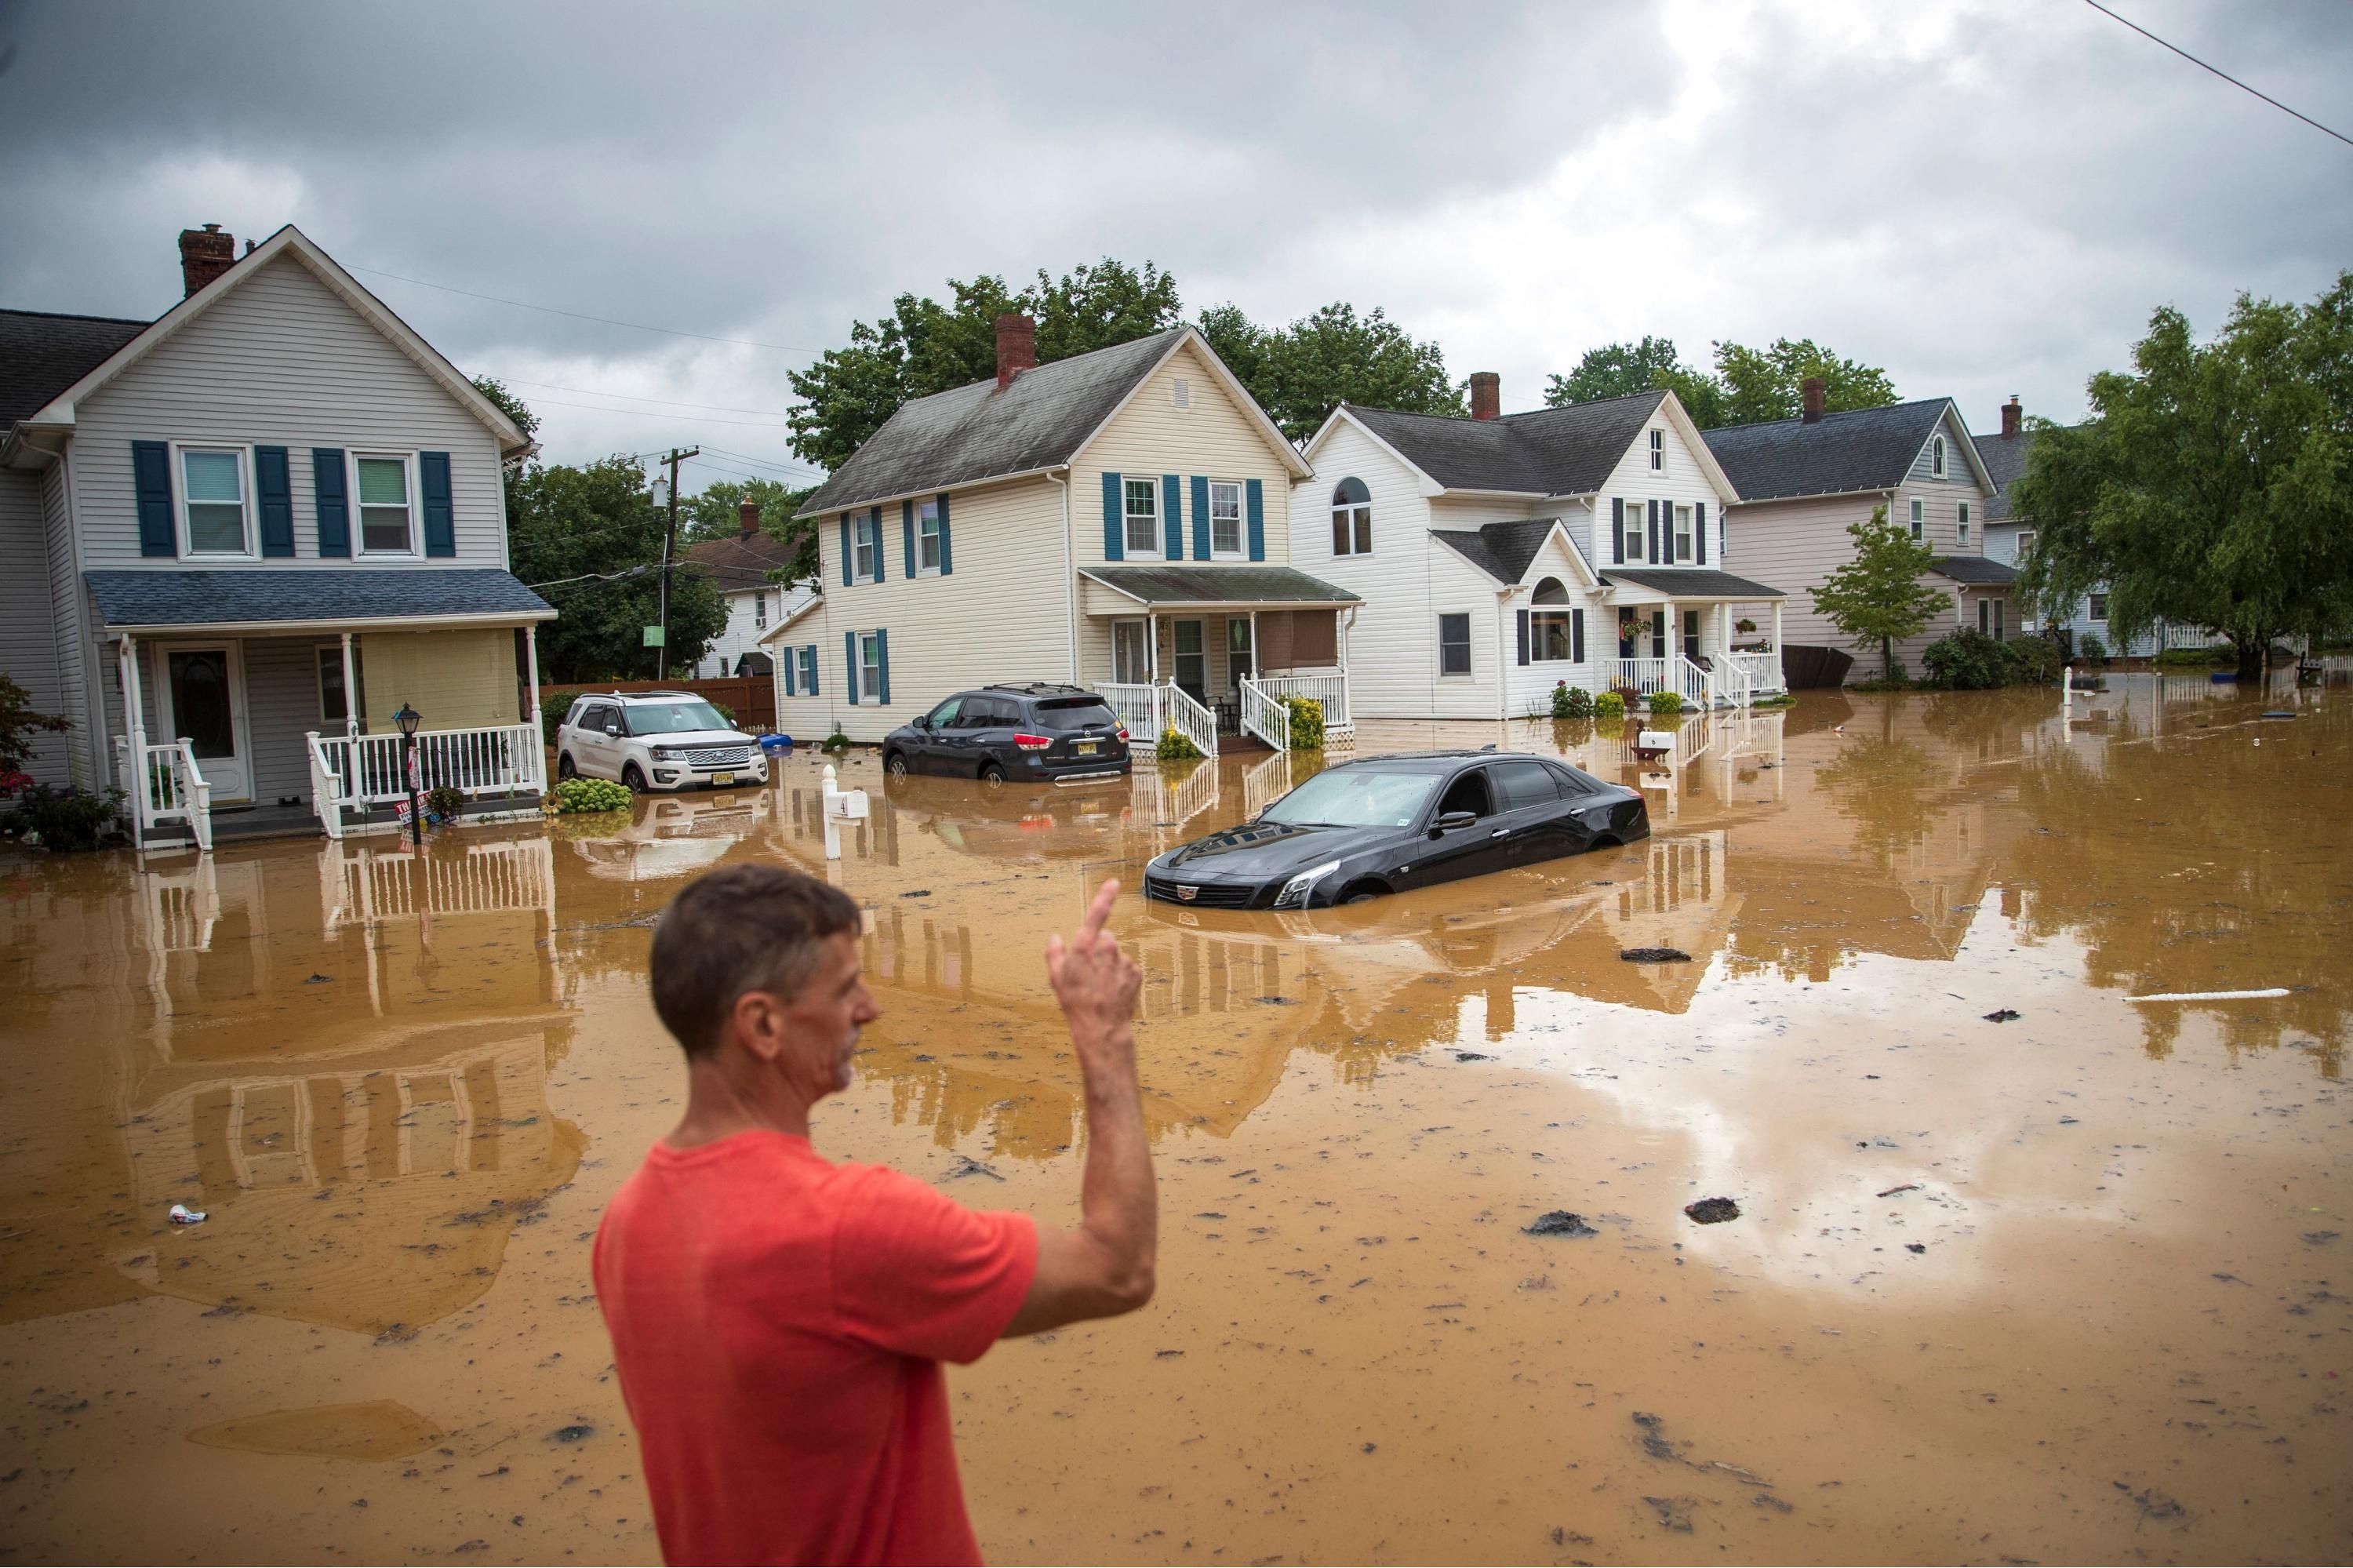 An evacuated resident points in the direction of his home following a flash flood, which came as Tropical Storm Henri made landfall, in Helmetta, New Jersey on August 22, 2021.